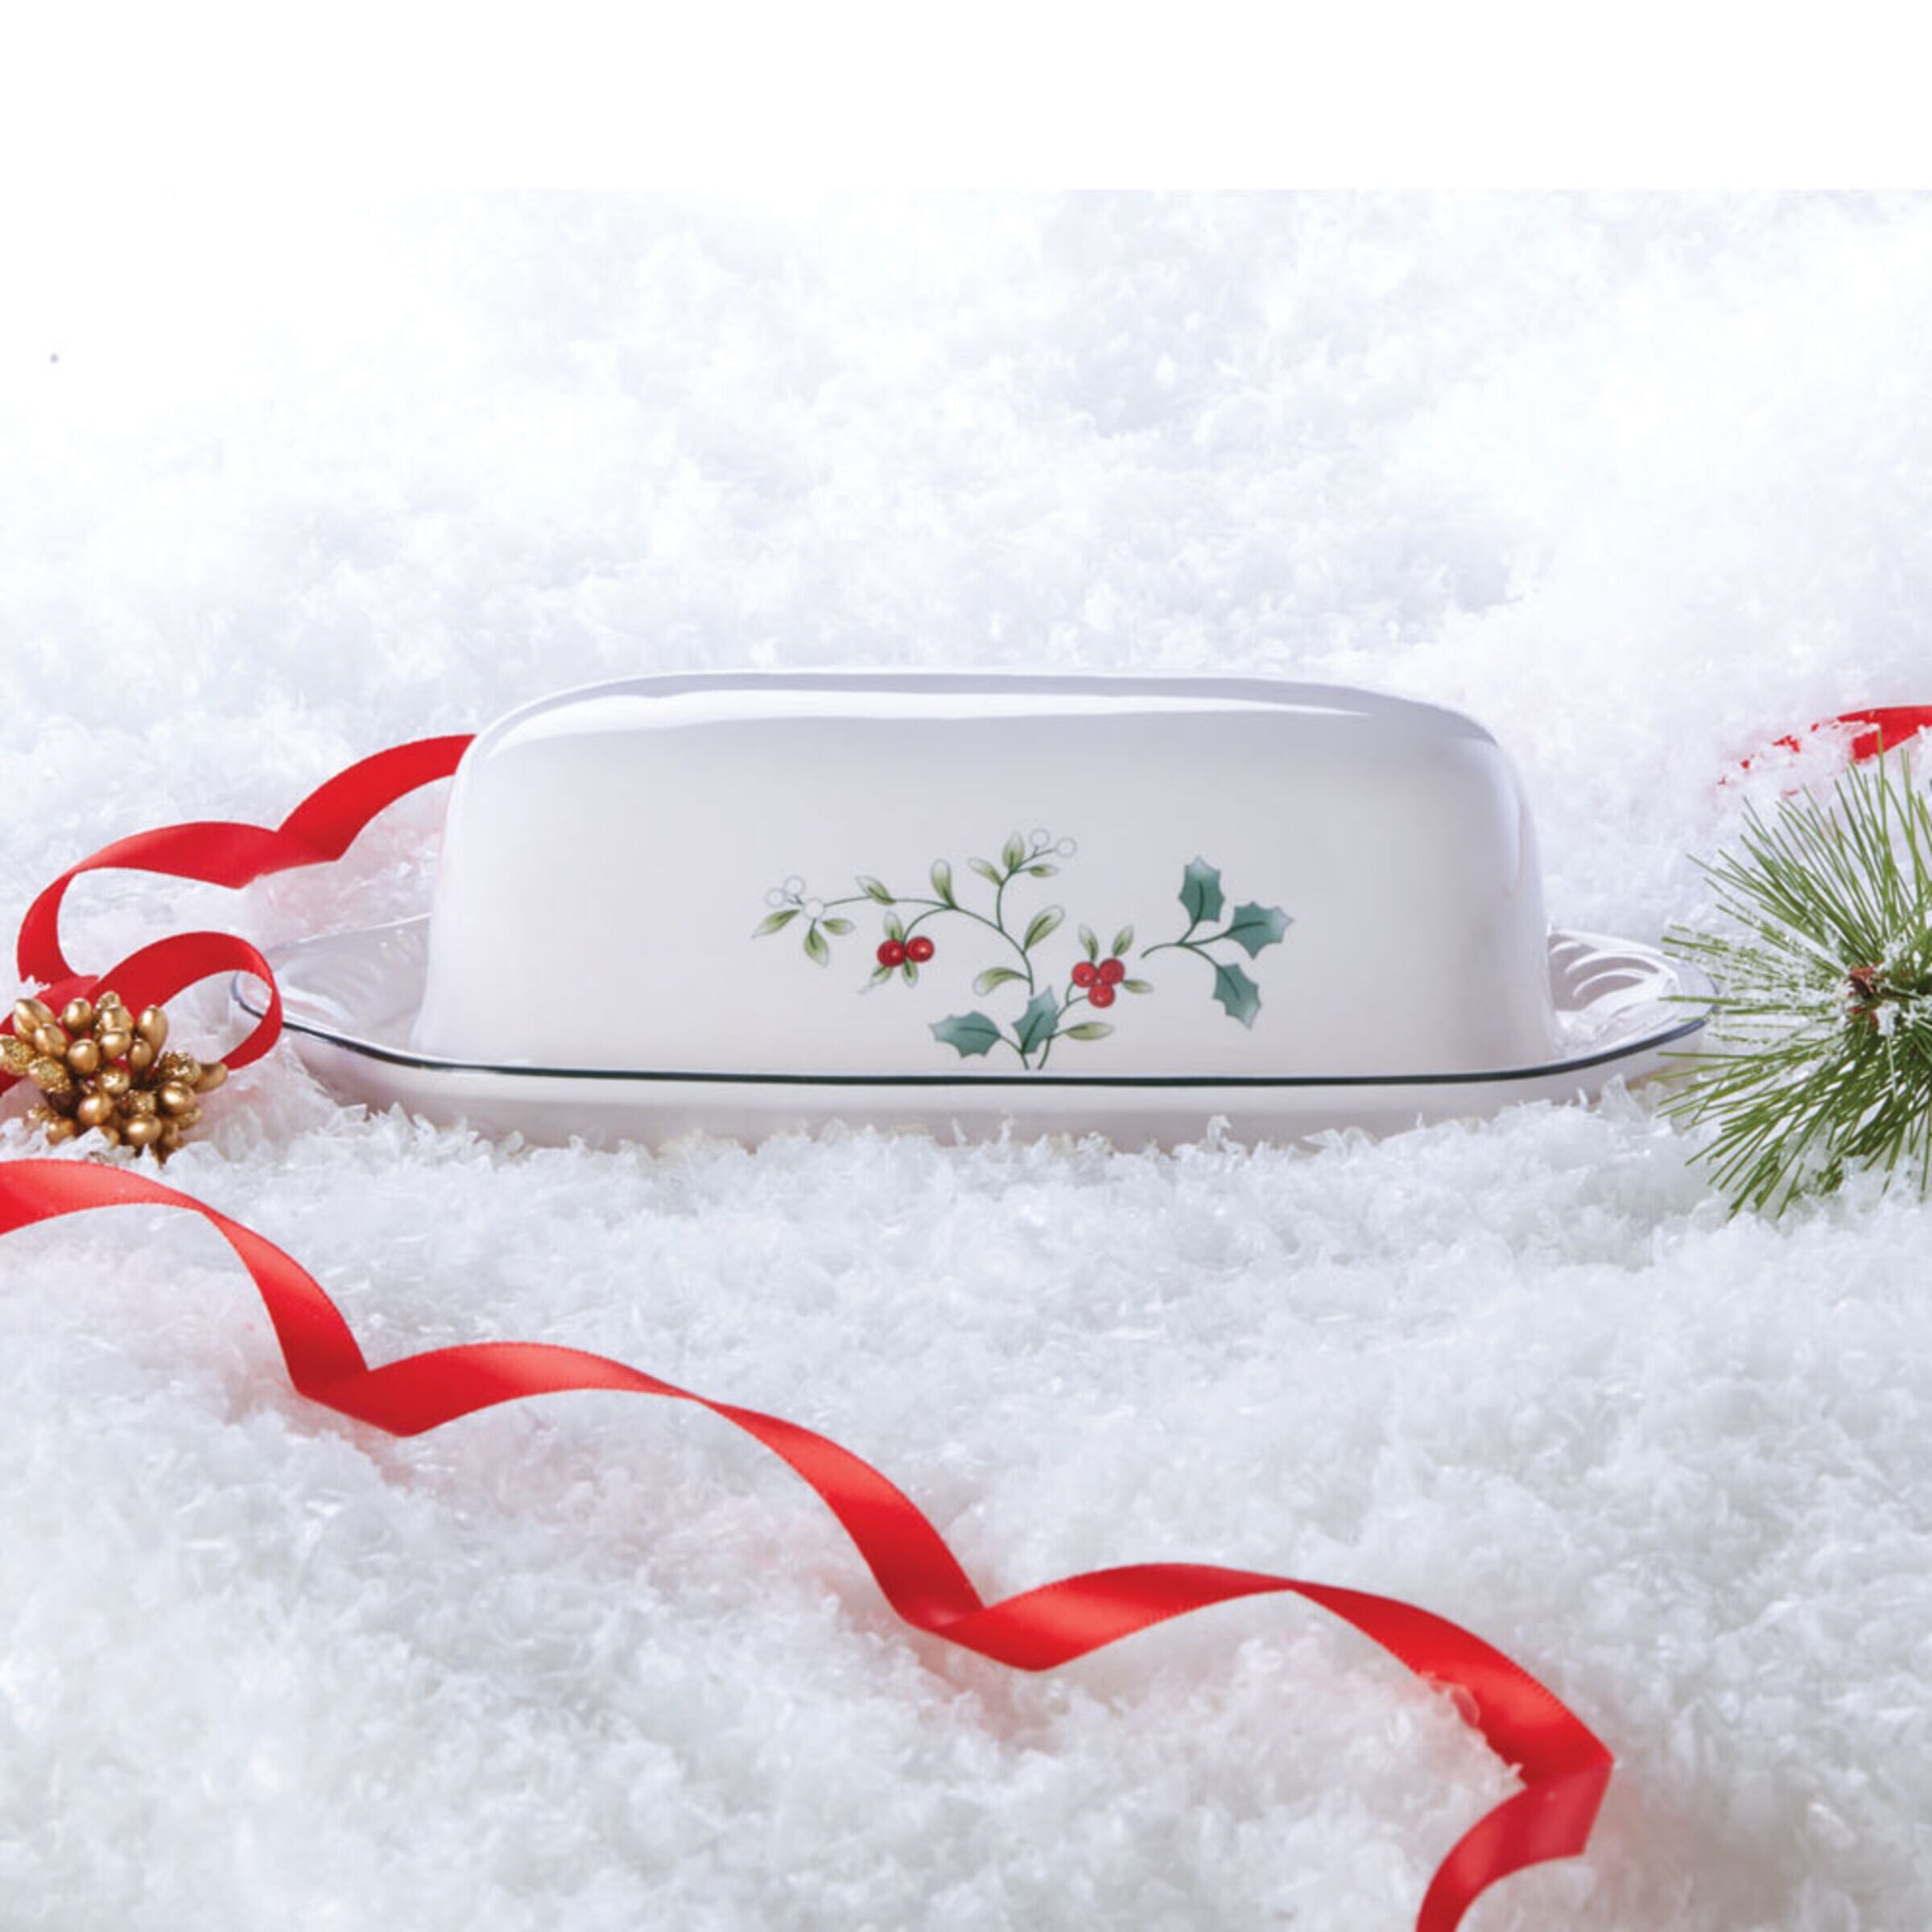 Pfaltzgraff Winterberry Covered Butter Dish - N/A